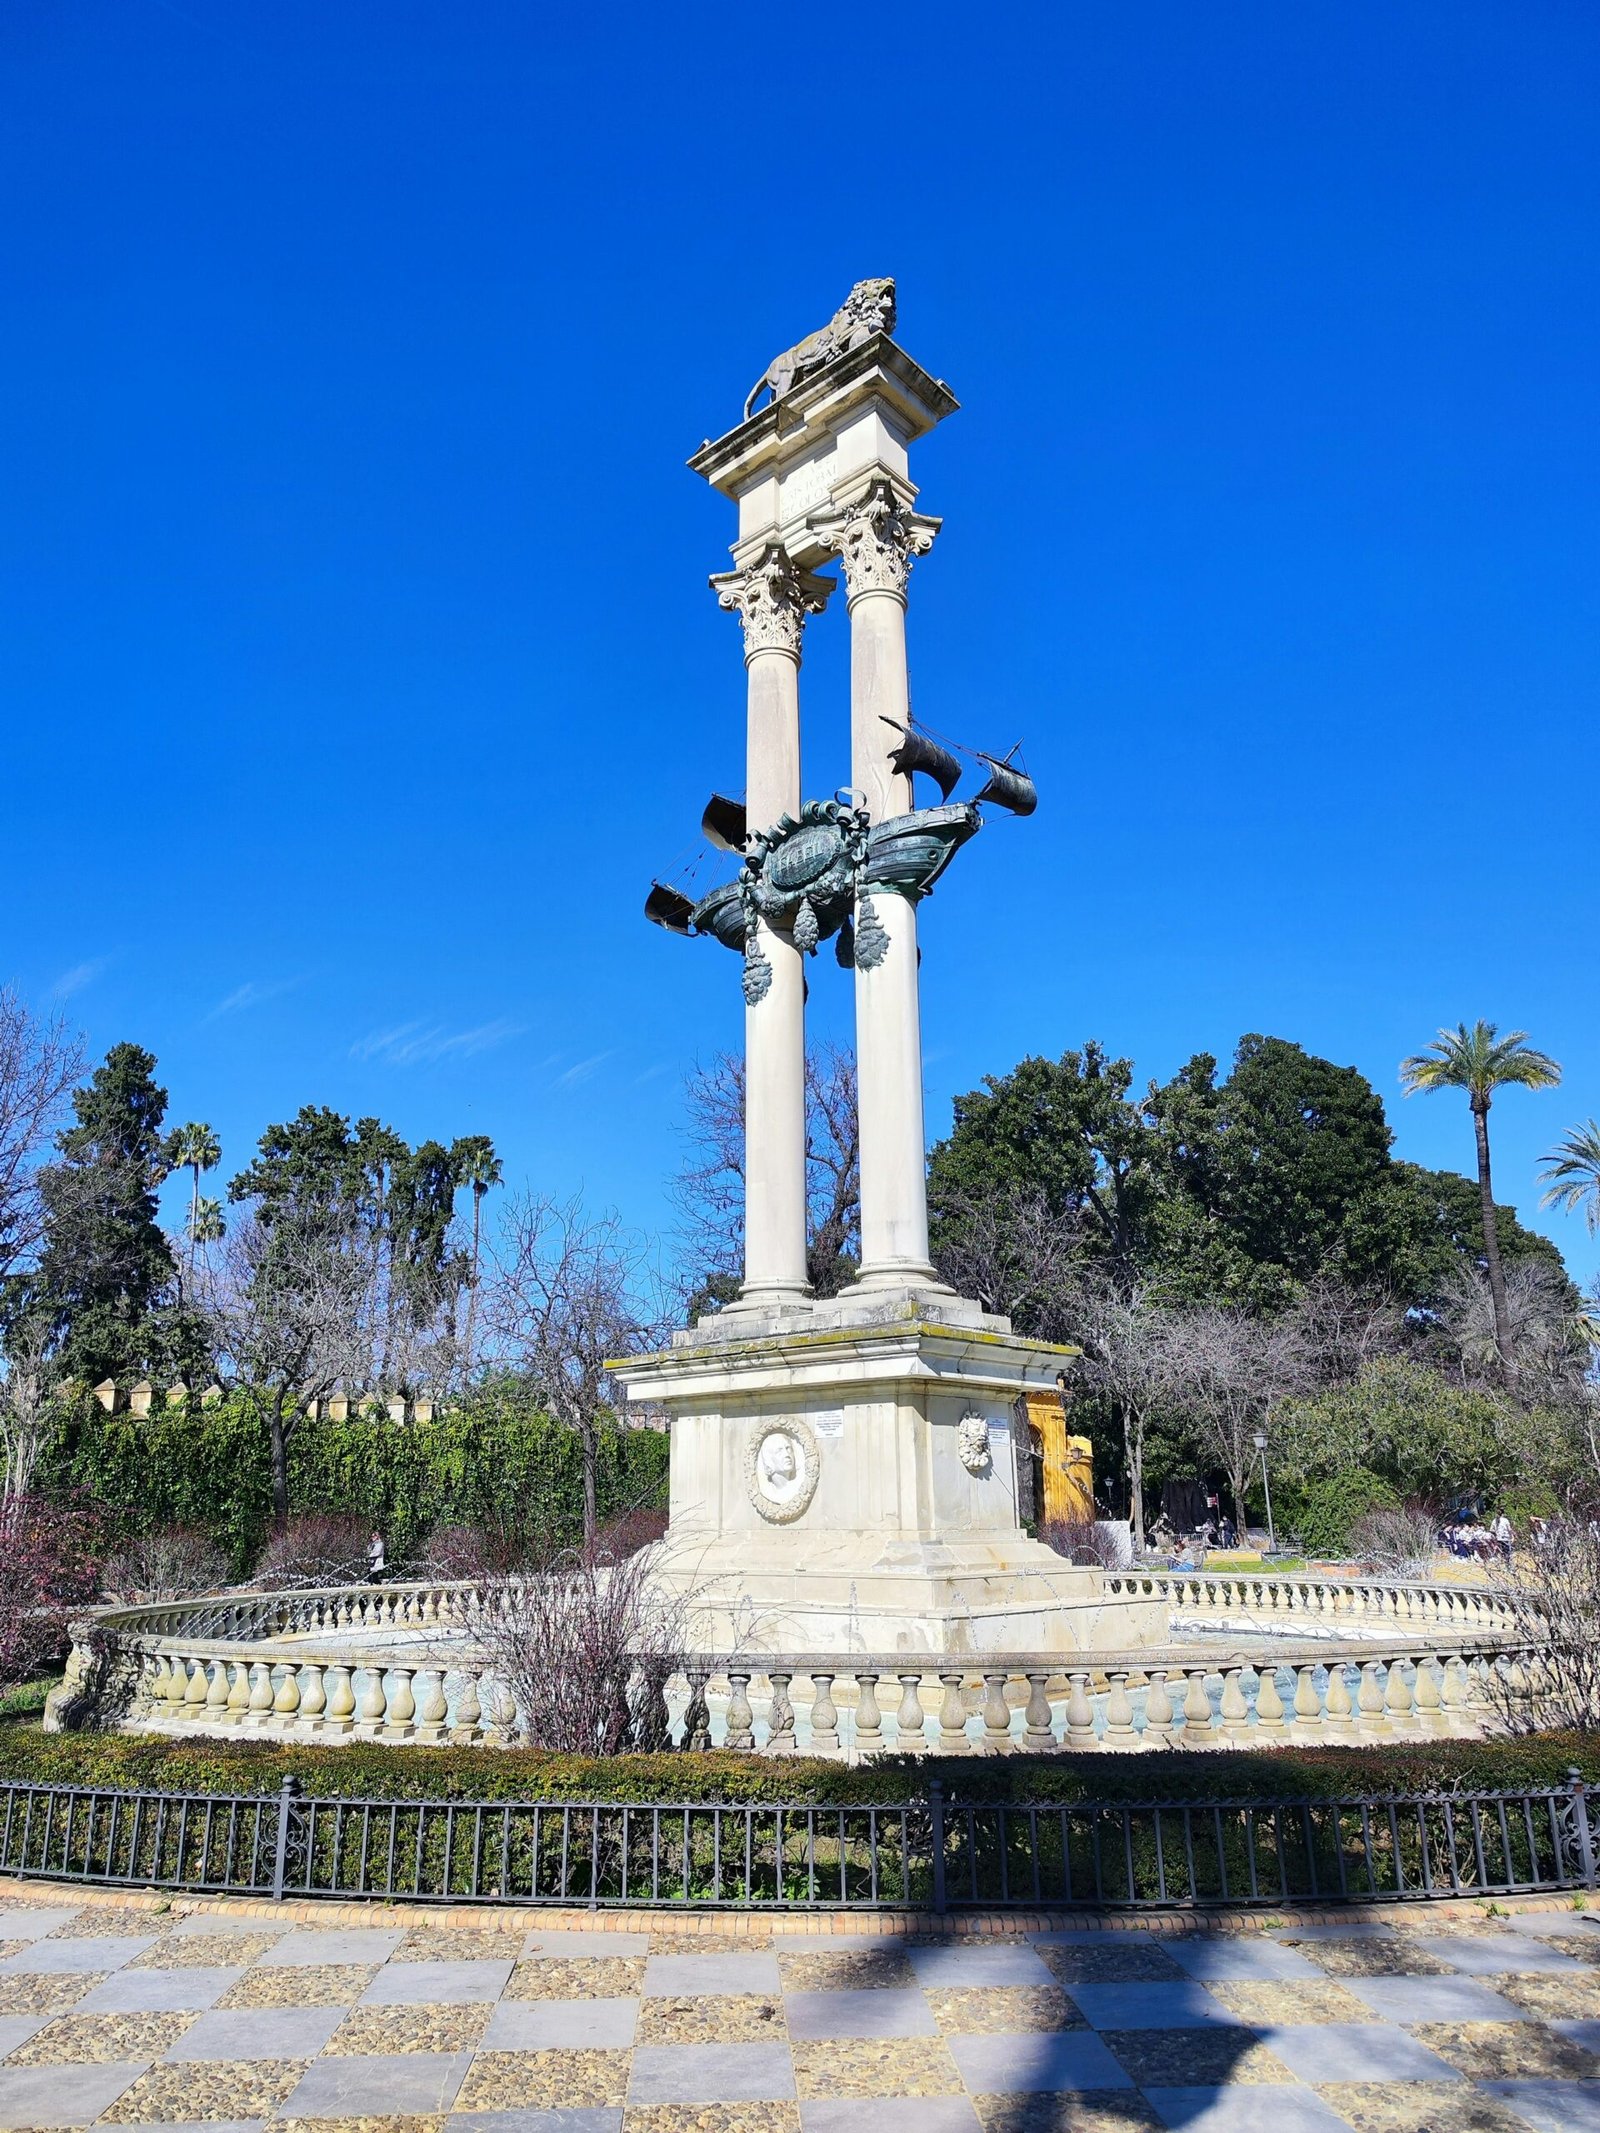 a statue of a horse on a pedestal in a park